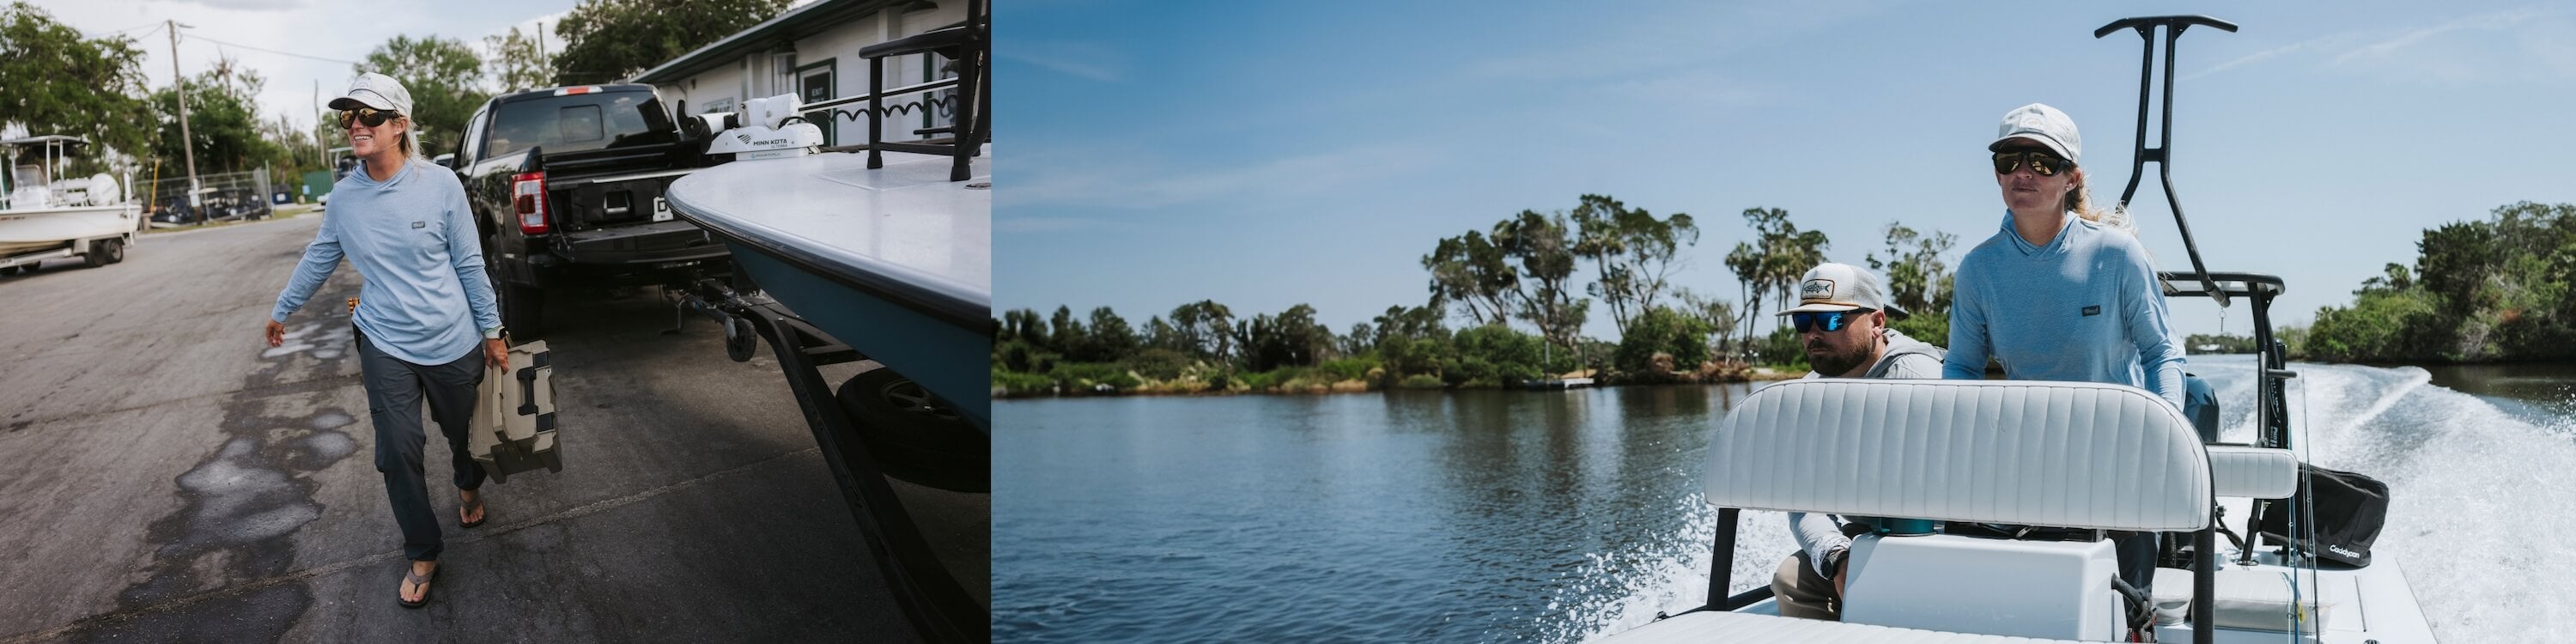 Split image of a fisher-woman carrying a DECKED D-Co case at the boat launch and her and a friend driving their boat out for a day of in-shore fishing.